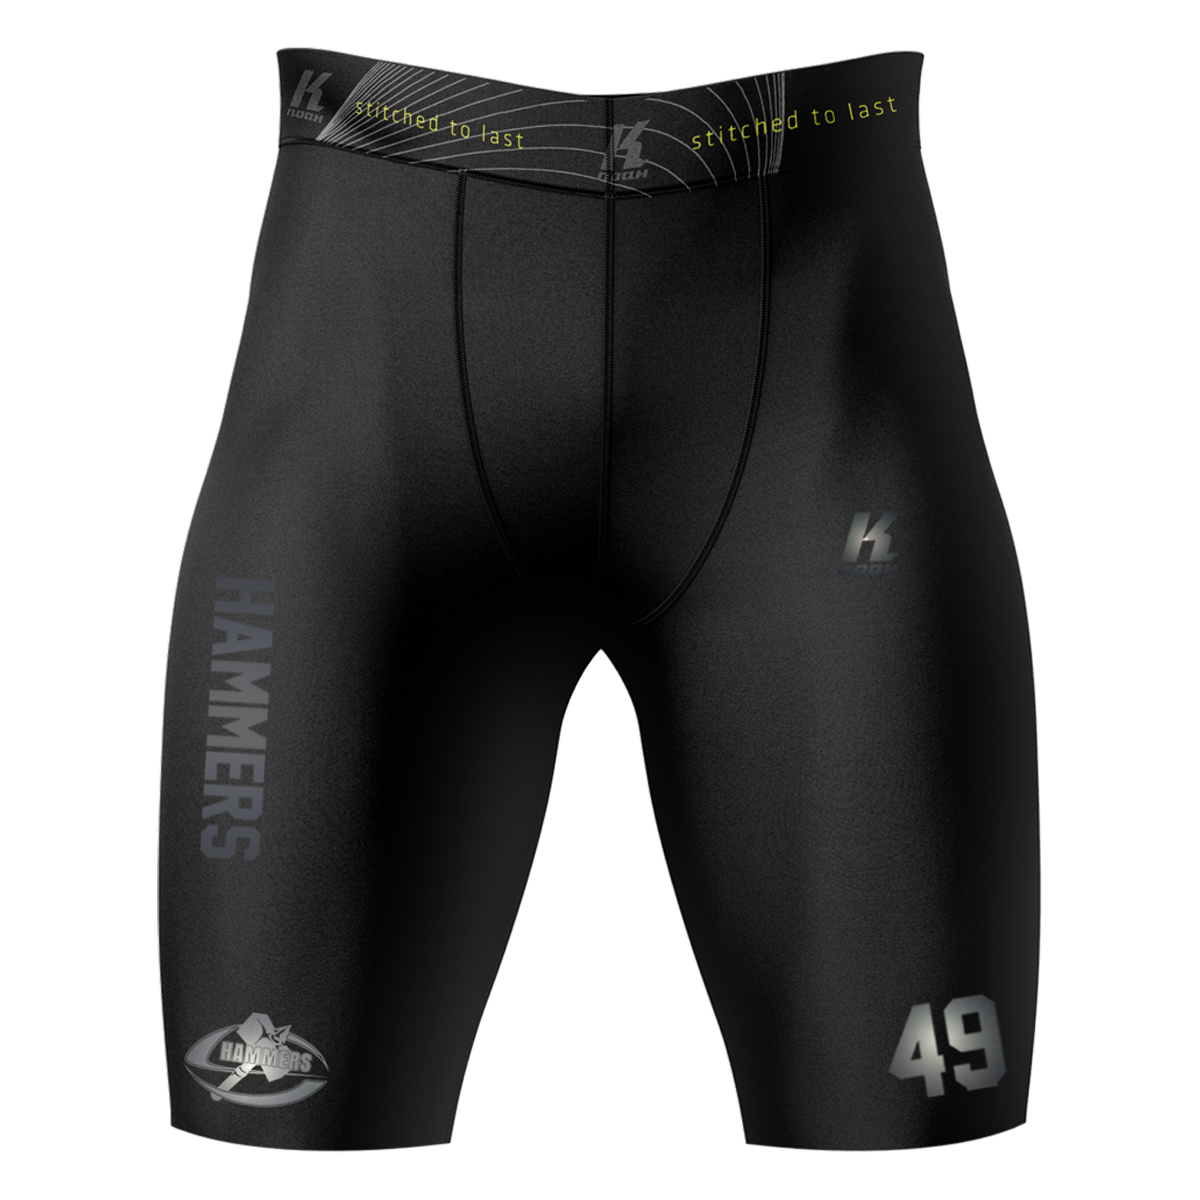 S-Hammers "Blackline" K.Tech Fiber Compression Pant BA0512 with Playernumber/Initials